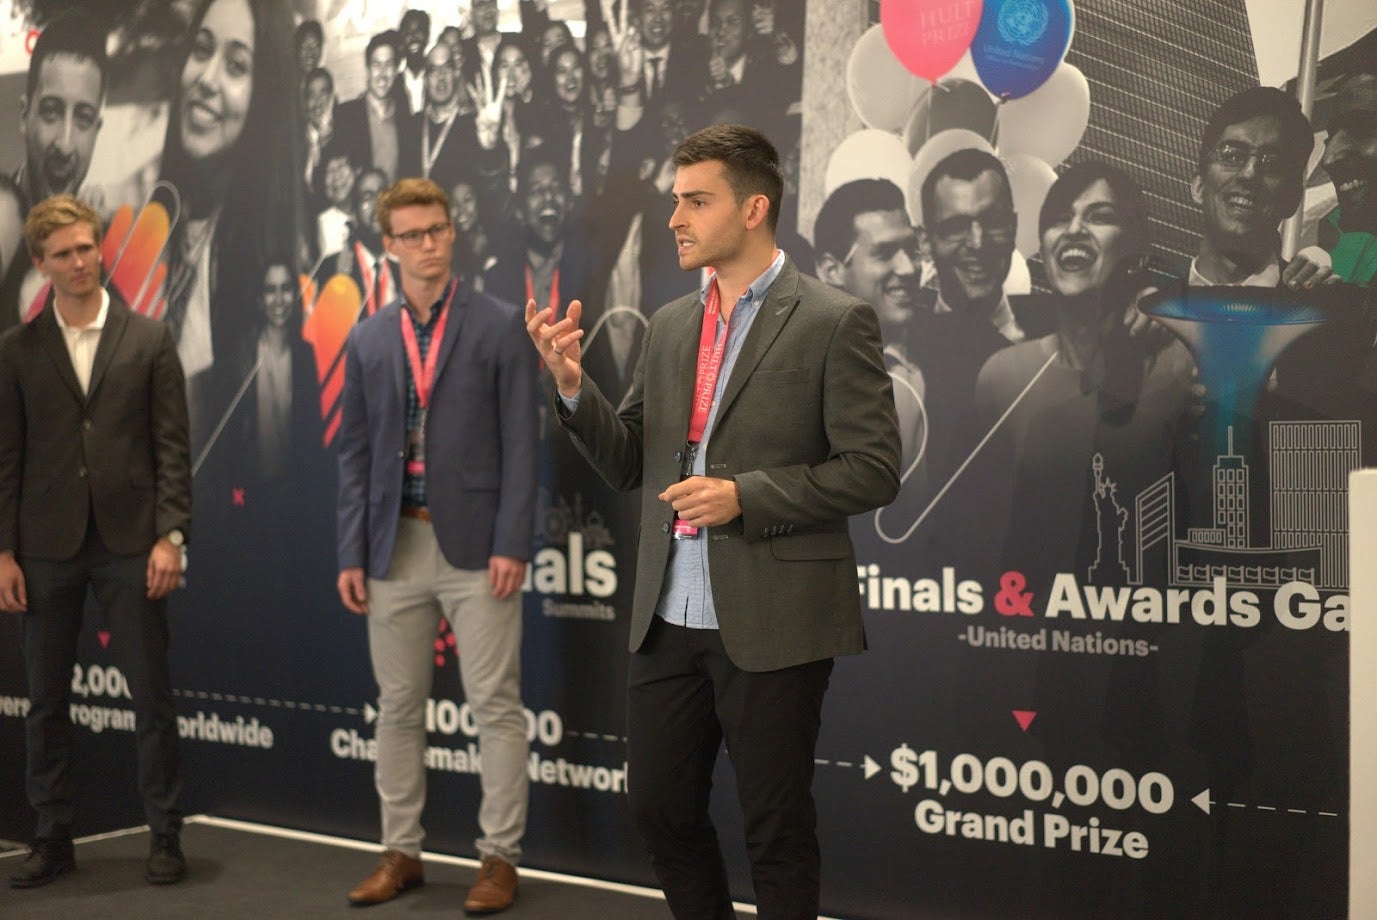 Rareș Topor-Gosman, pitches Team Phonic at the English castle Hult Prize accelerator supported by Mitchell Catoen, and David Ferris.